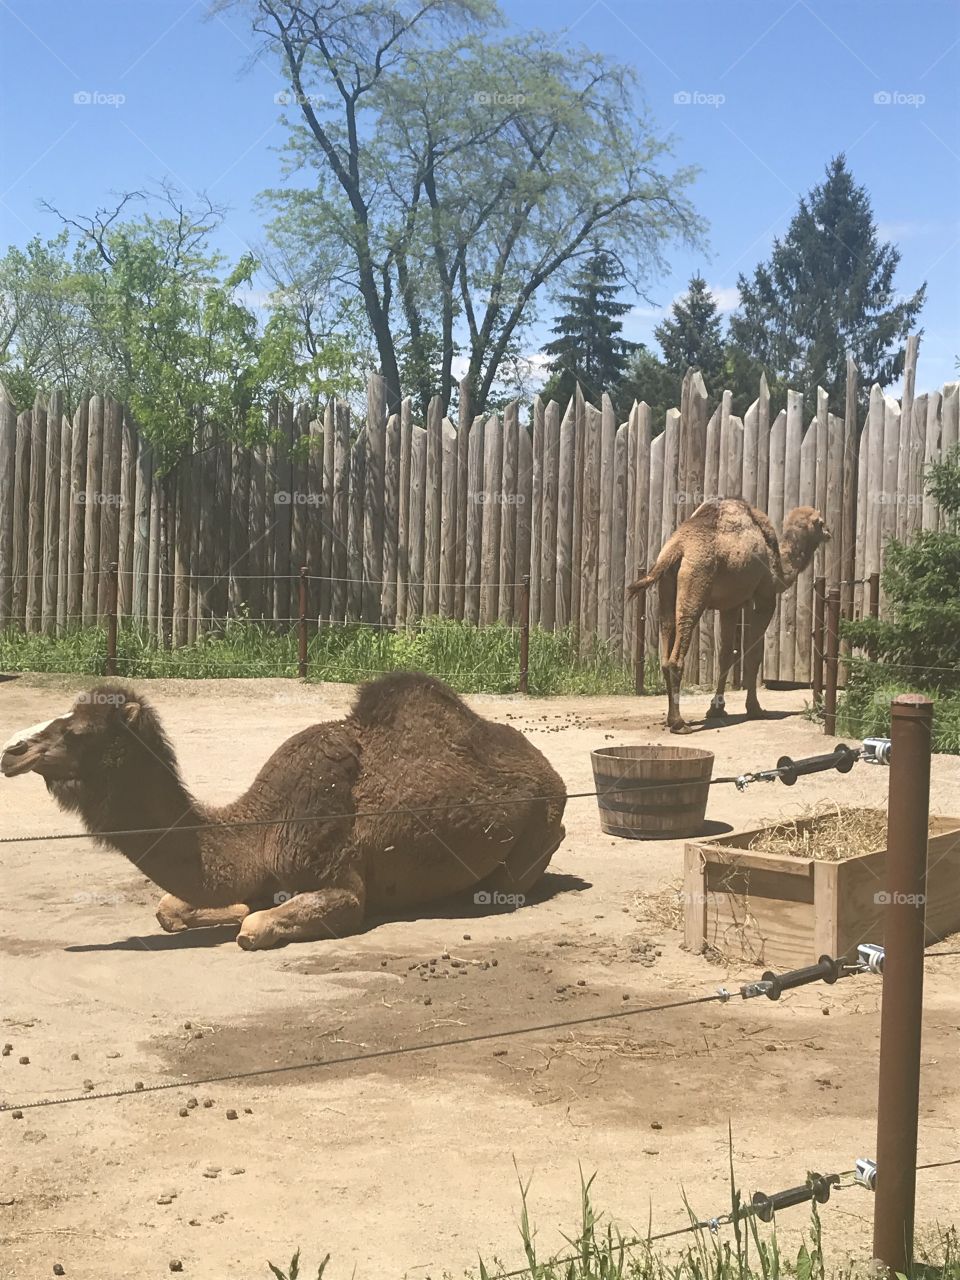 Camel rides, anyone? Most of the animals were lazy on this spring day!